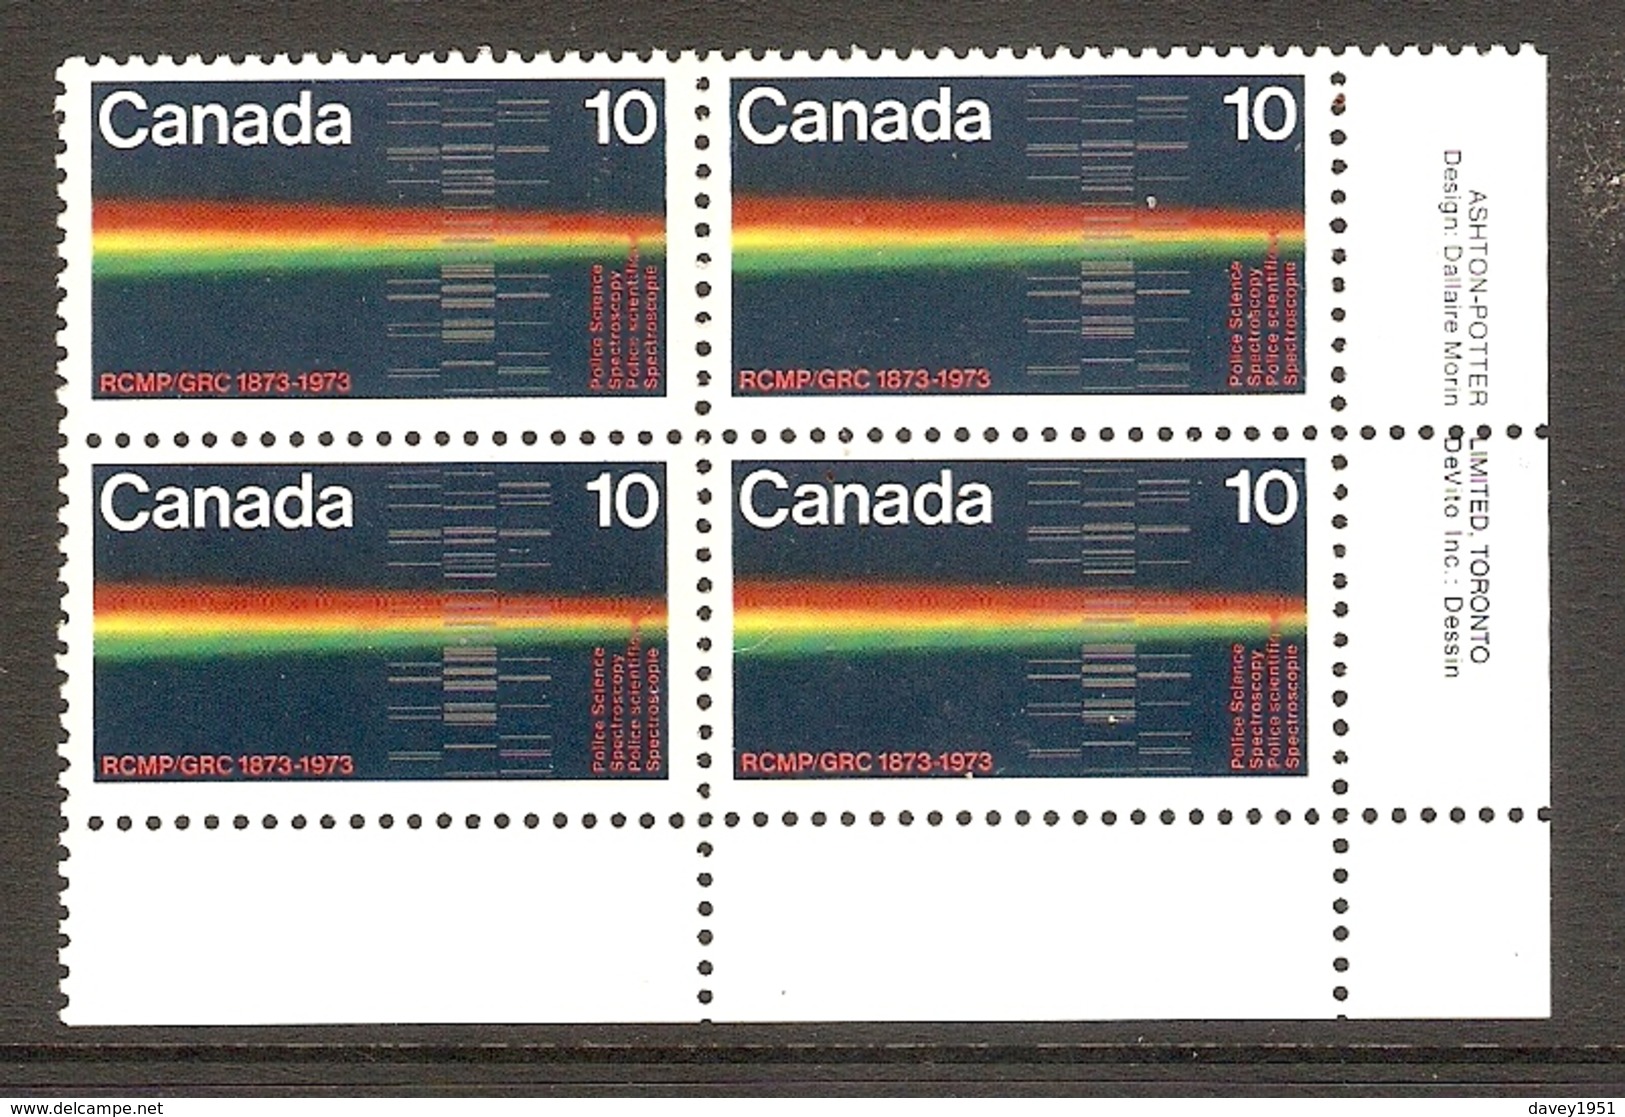 003744 Canada 1973 RCMP 10c Plate Block LR MNH - Plate Number & Inscriptions